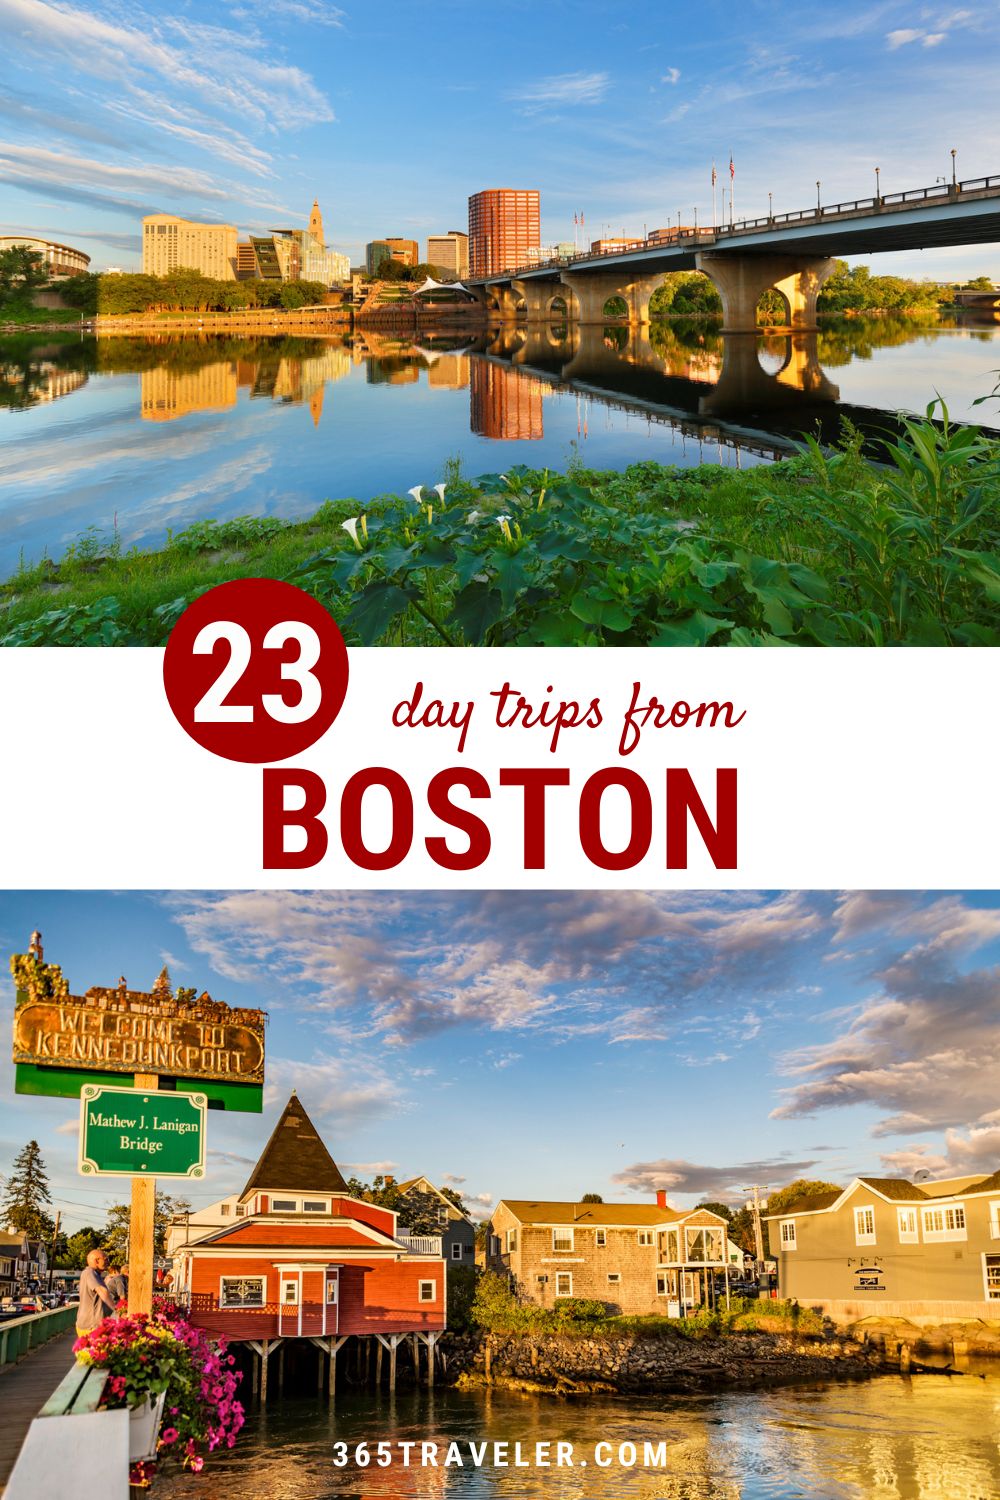 23 BEST DAY TRIPS FROM BOSTON YOU'VE GOT TO TAKE